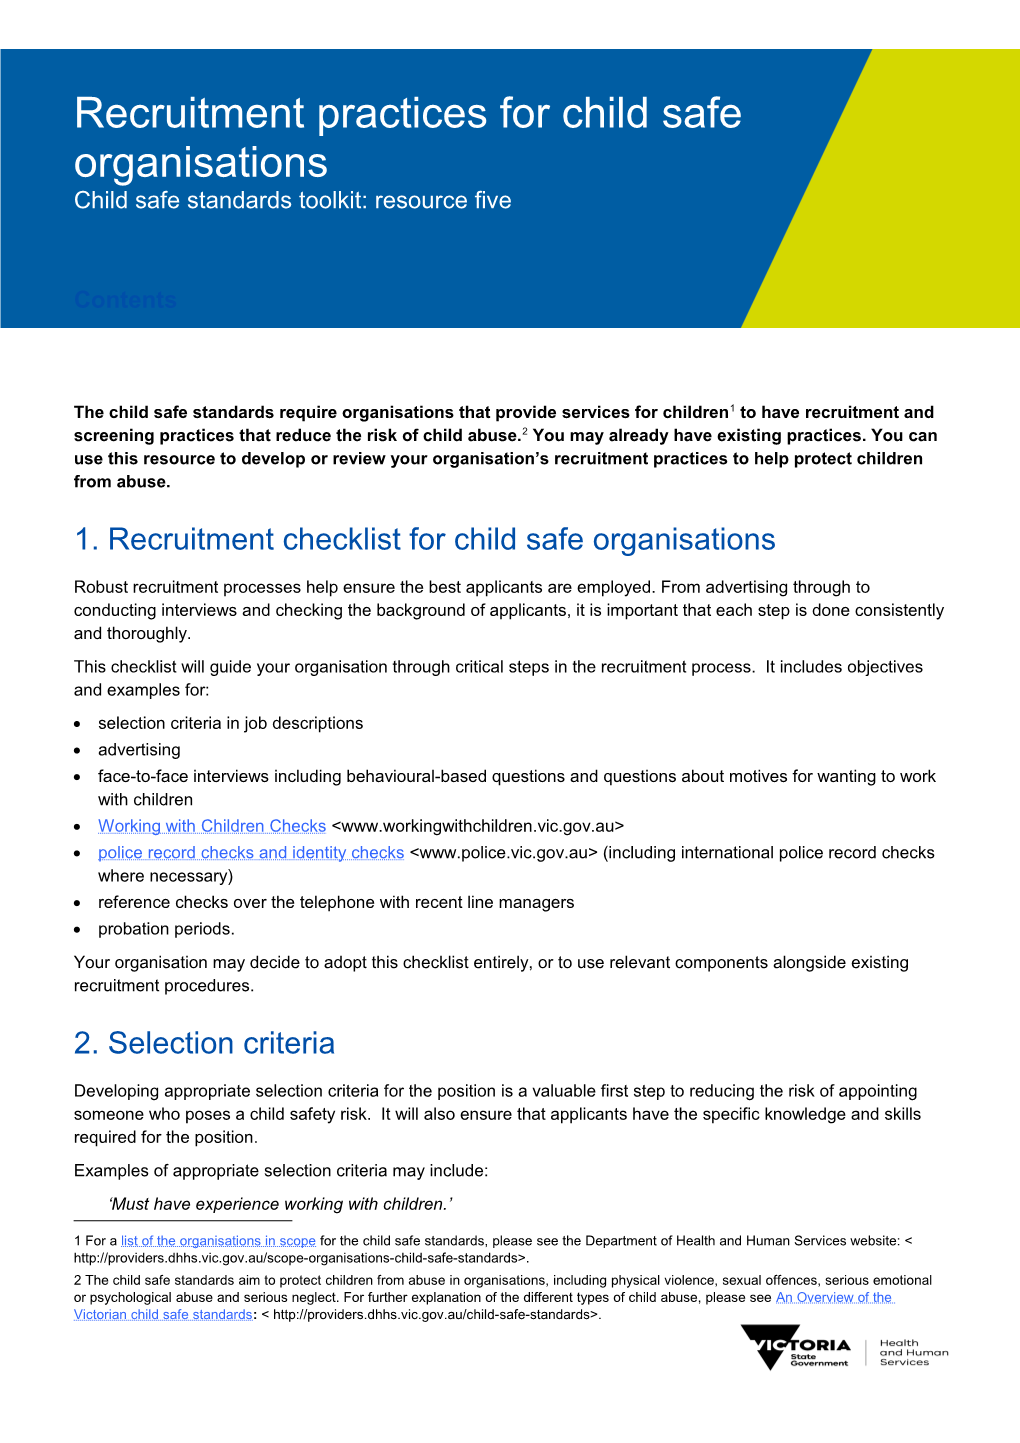 Recruitment Practices for Child Safe Organisations: Child Safe Standards Toolkit: Resource 5